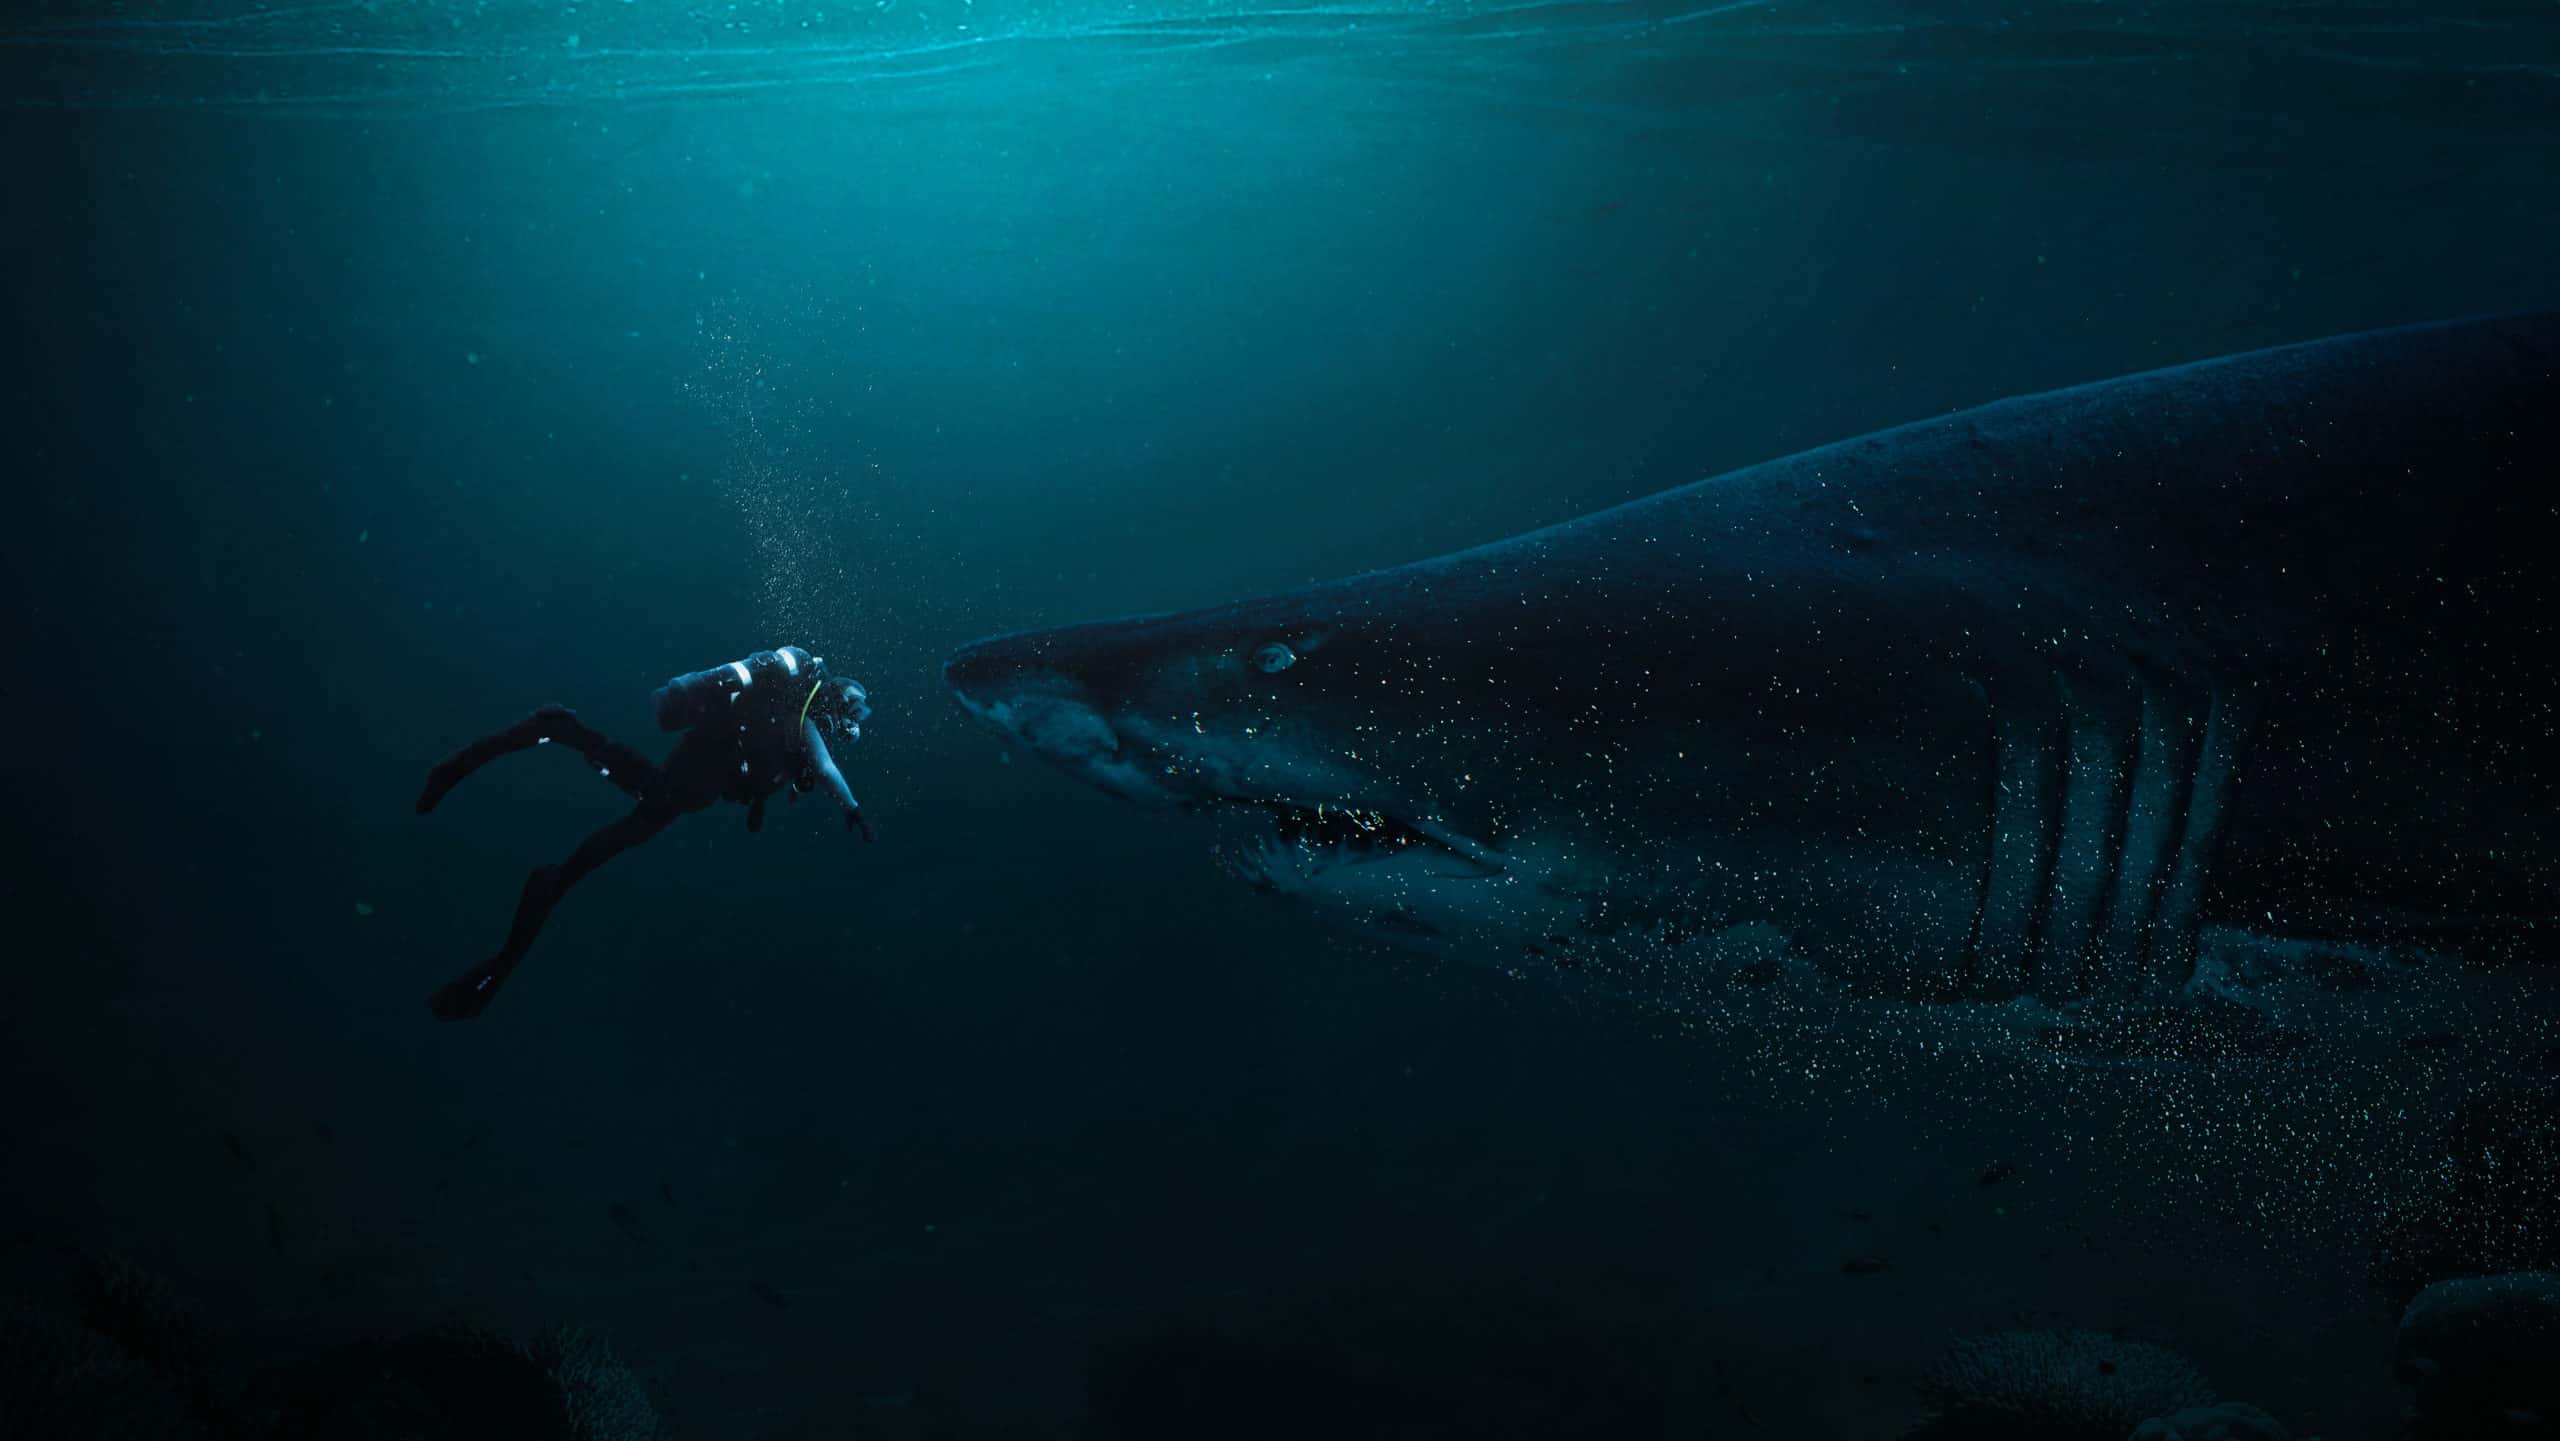 Create a Photomanipulation of a Shark and a Diver